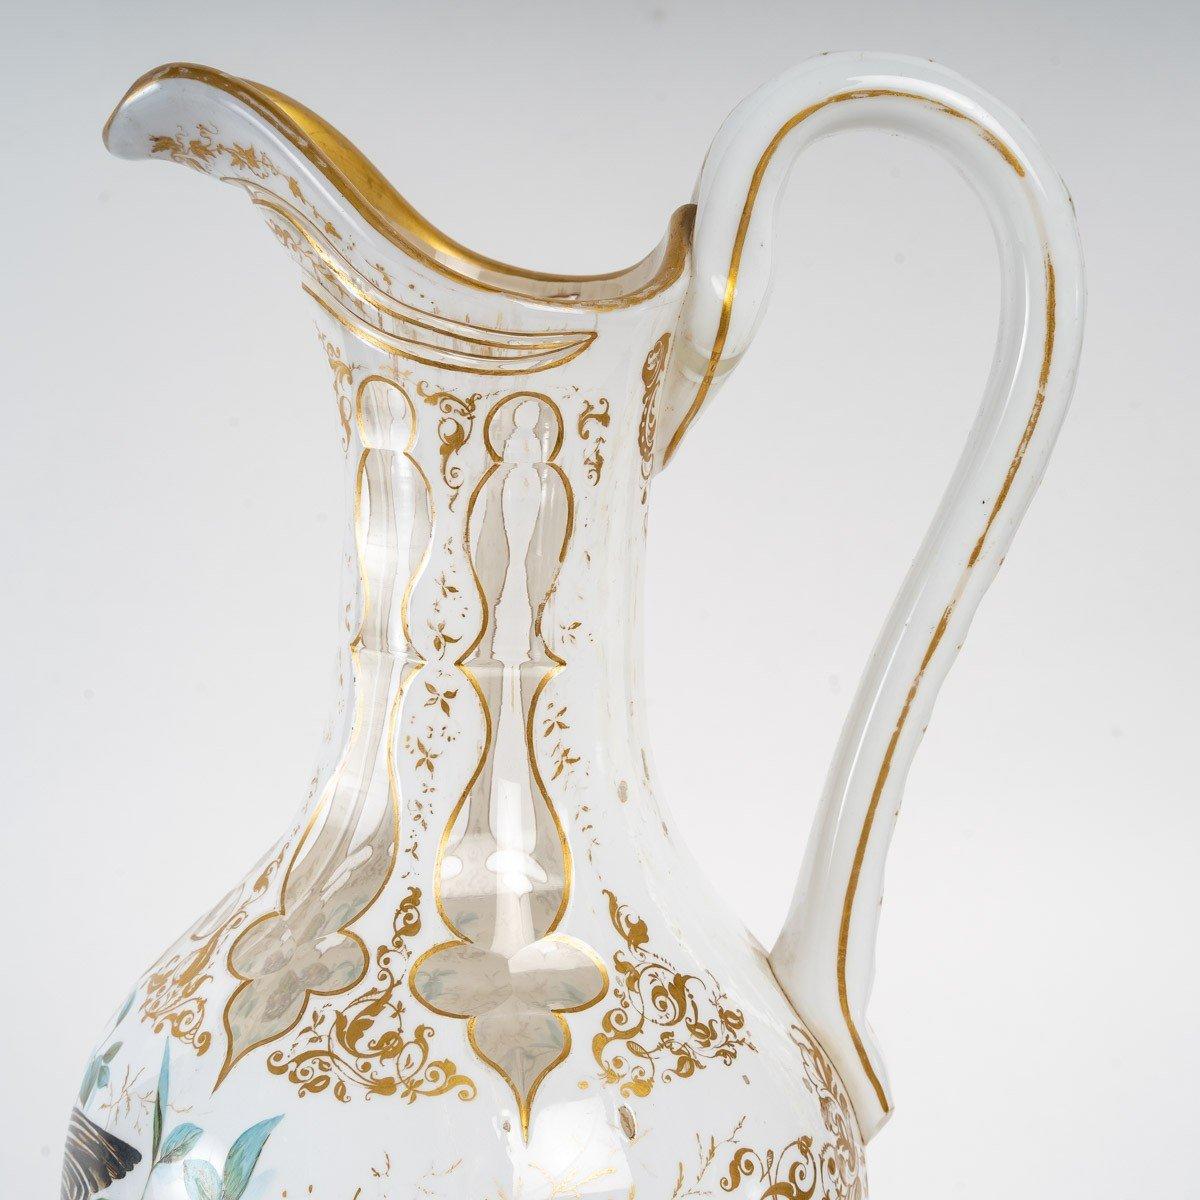 Bohemian service, 19th century
Bohemian crystal overlay service, 19th century, consists of a carafe and a glass, the carafe has a special handle painted with a bird and butterflies.
Bohemian service, 19th century
Measures: Carafe - H: 35 cm, W: